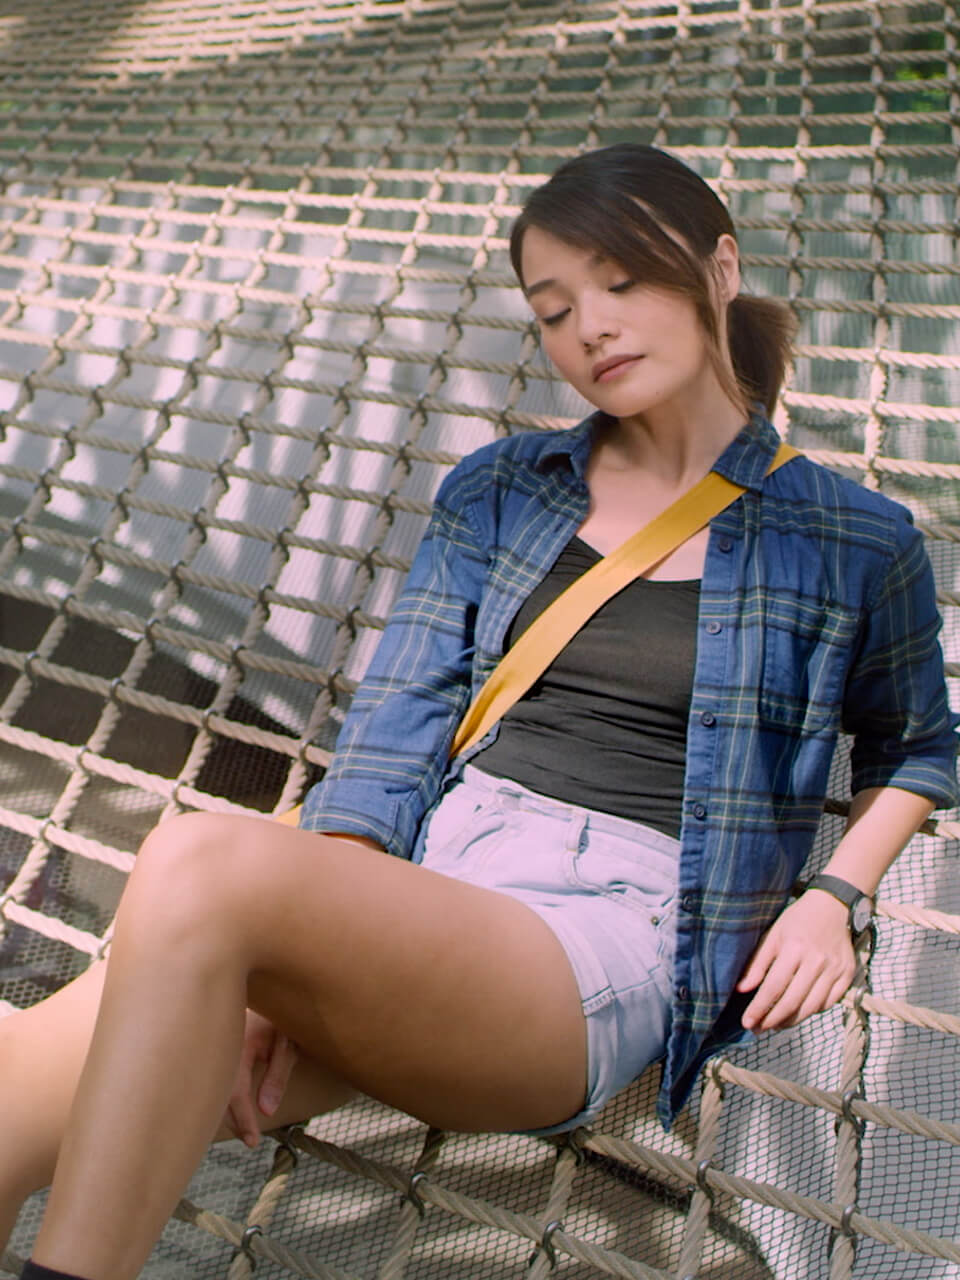 A girl looking downwards and sitting on the ground with legs stretched out